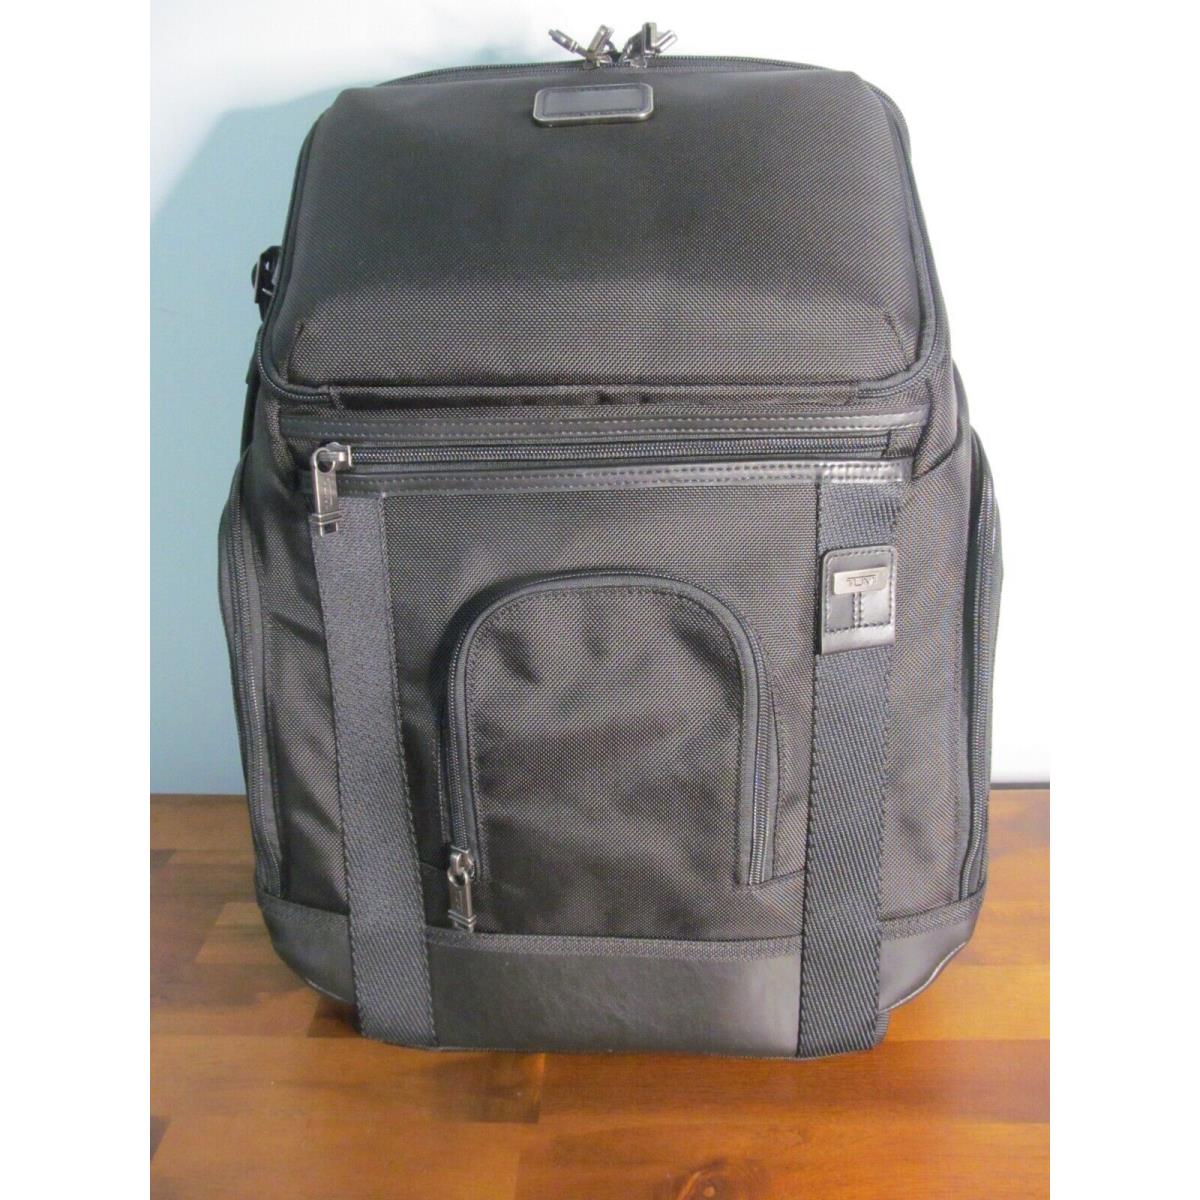 Tumi Phinney Large Black Backpack 15 Laptop Compartment Ftx Nylon Leather-nwt